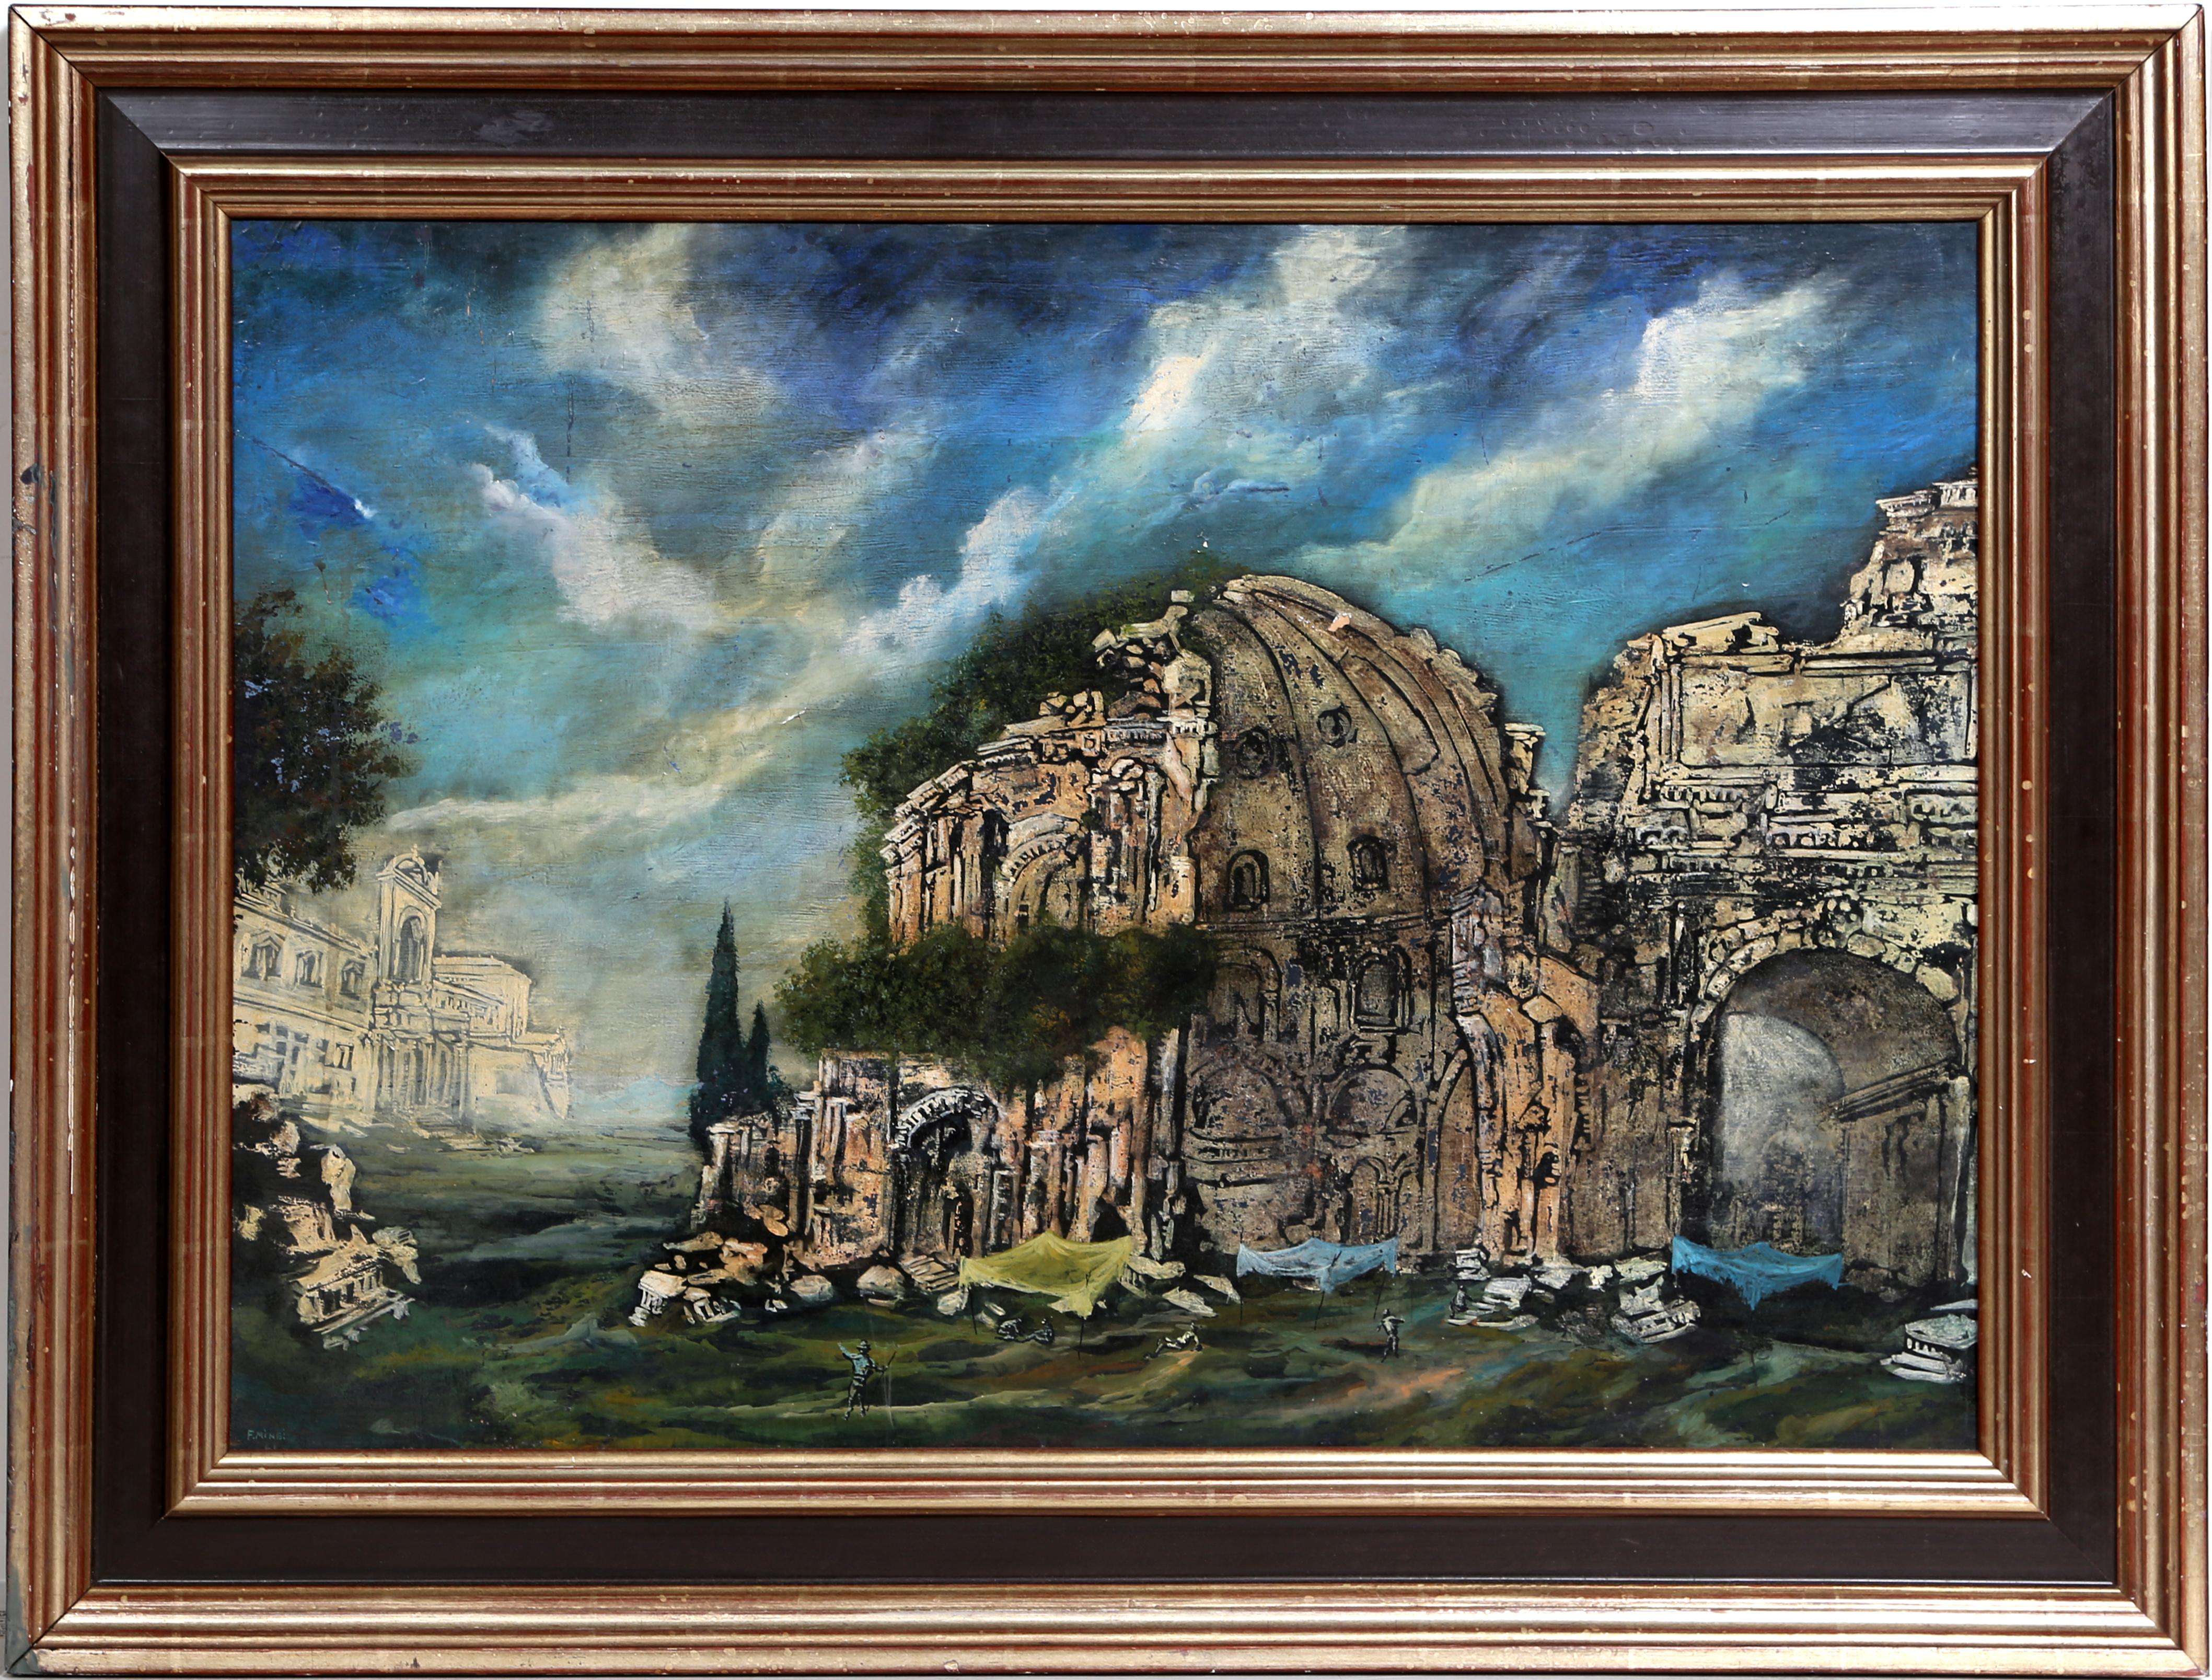 Artist: Franco Minei, Italian (1922 - )
Title: Rovini
Year: 1961
Medium: Oil on Wood, signed and dated l.l.
Size: 18.5 in. x 26.5 in. (46.99 cm x 67.31 cm)
Frame Size: 25 x 33 inches